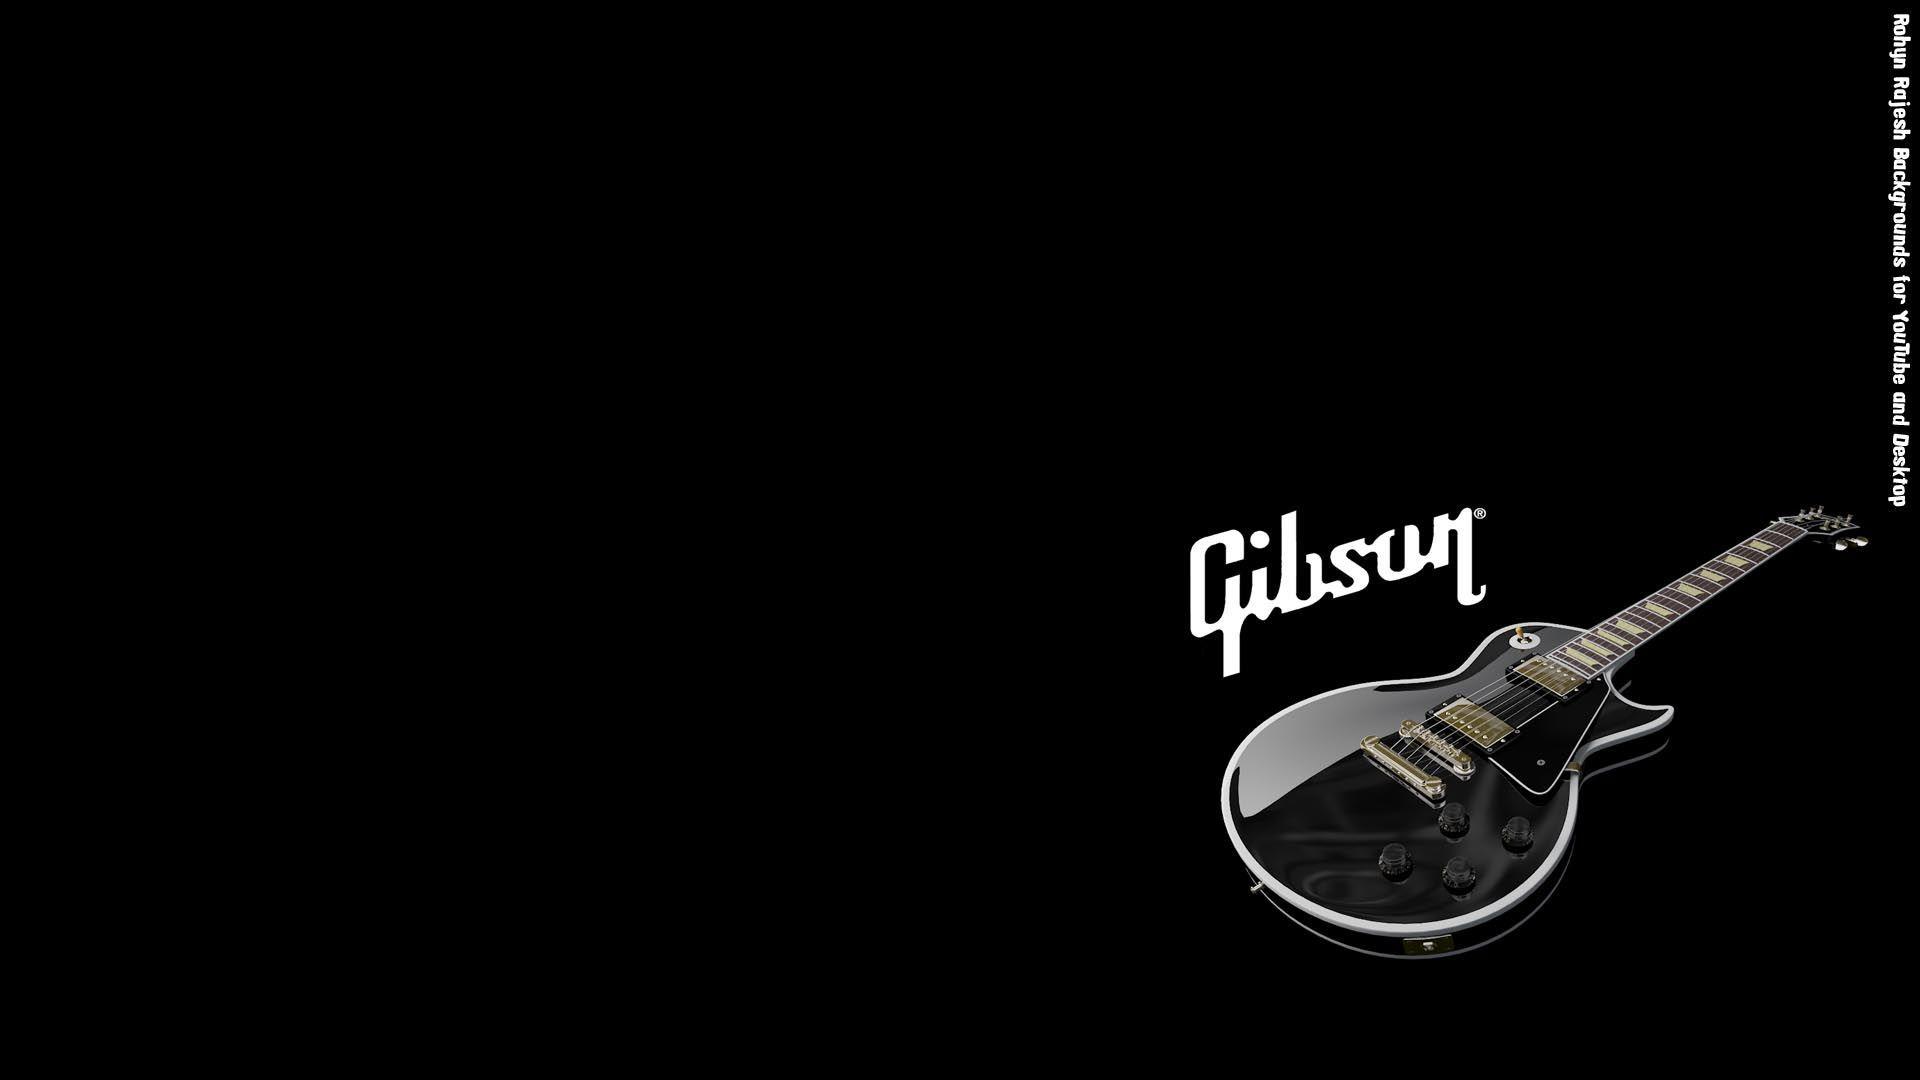 les_paul_gibson_hd_background_